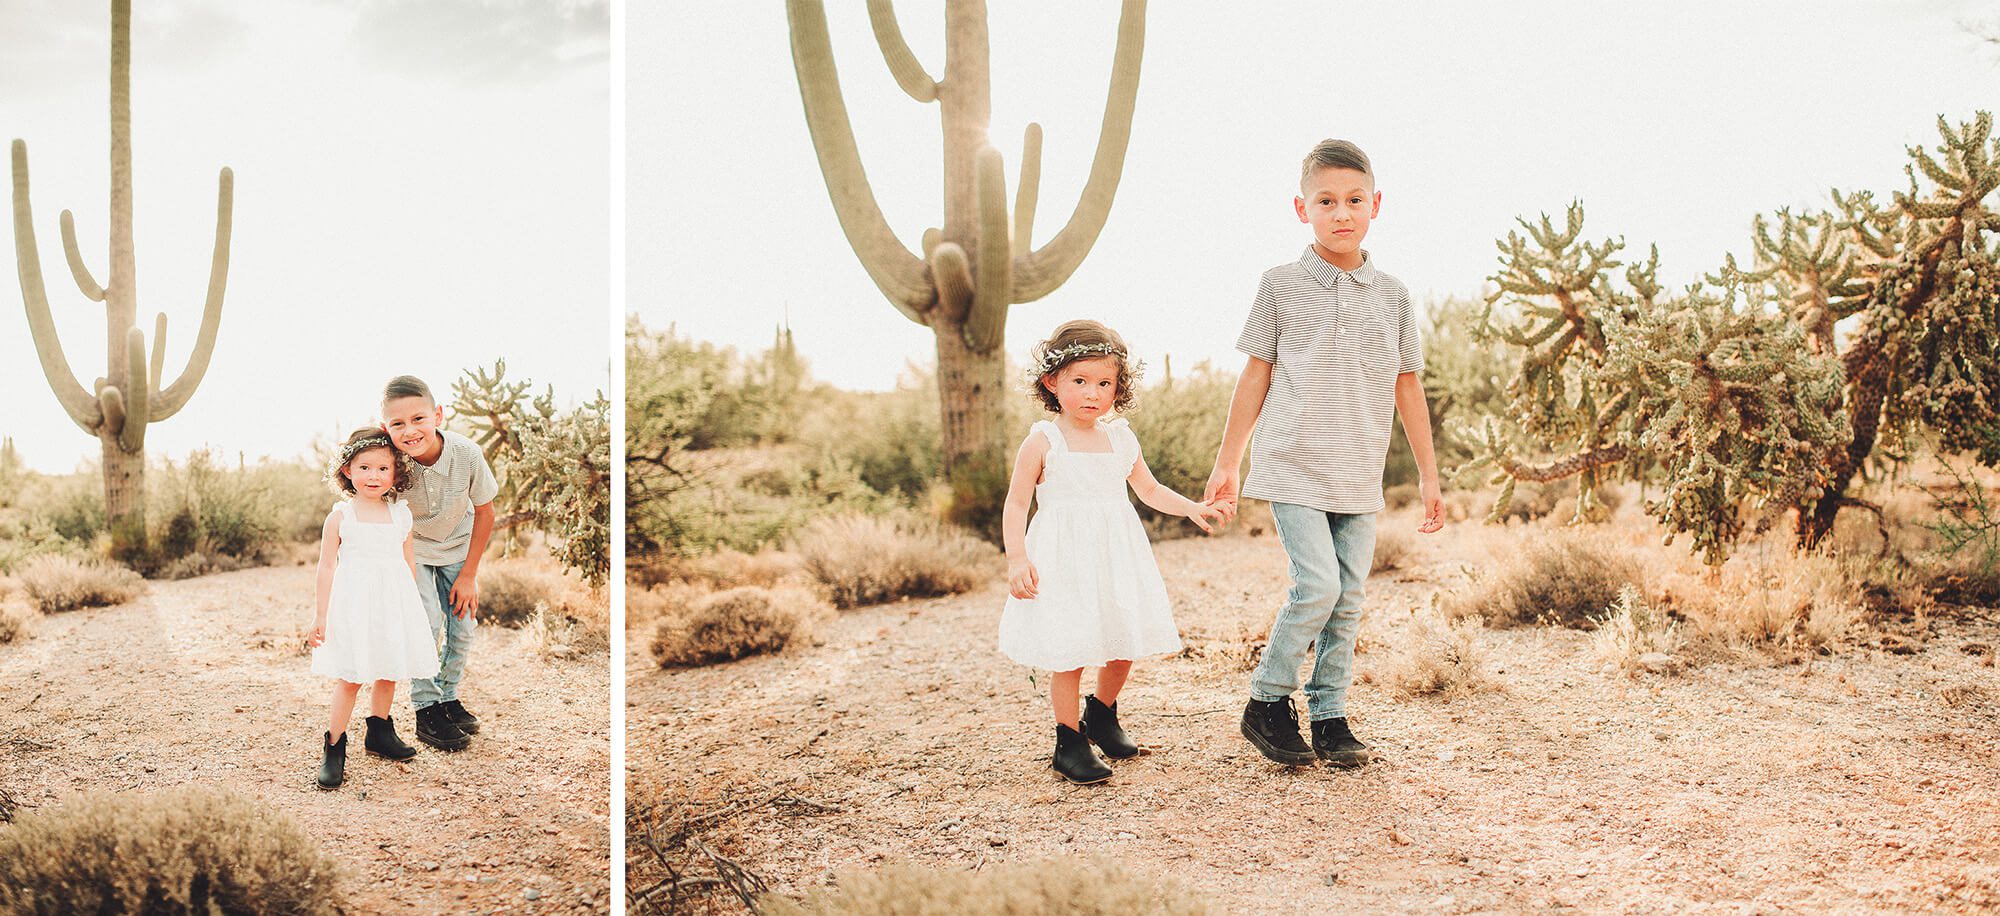 The Galindo children with the setting sun and a giant saguaro at their backs